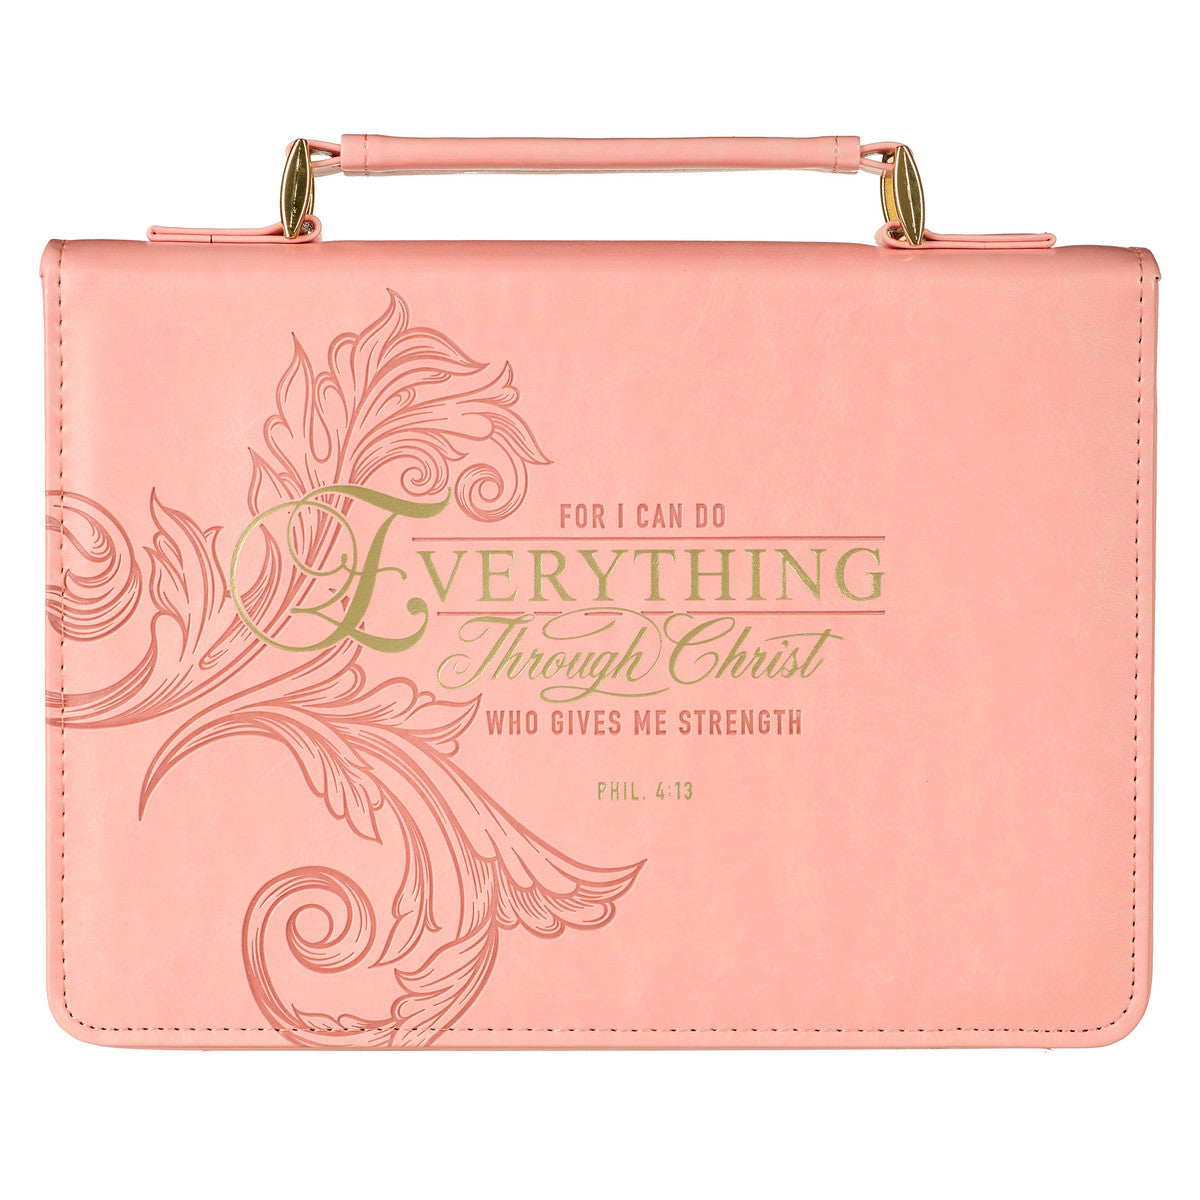 Through Christ Fluted Iris Pink Faux Leather Fashion Bible Cover - Philippians 4:13 - Large